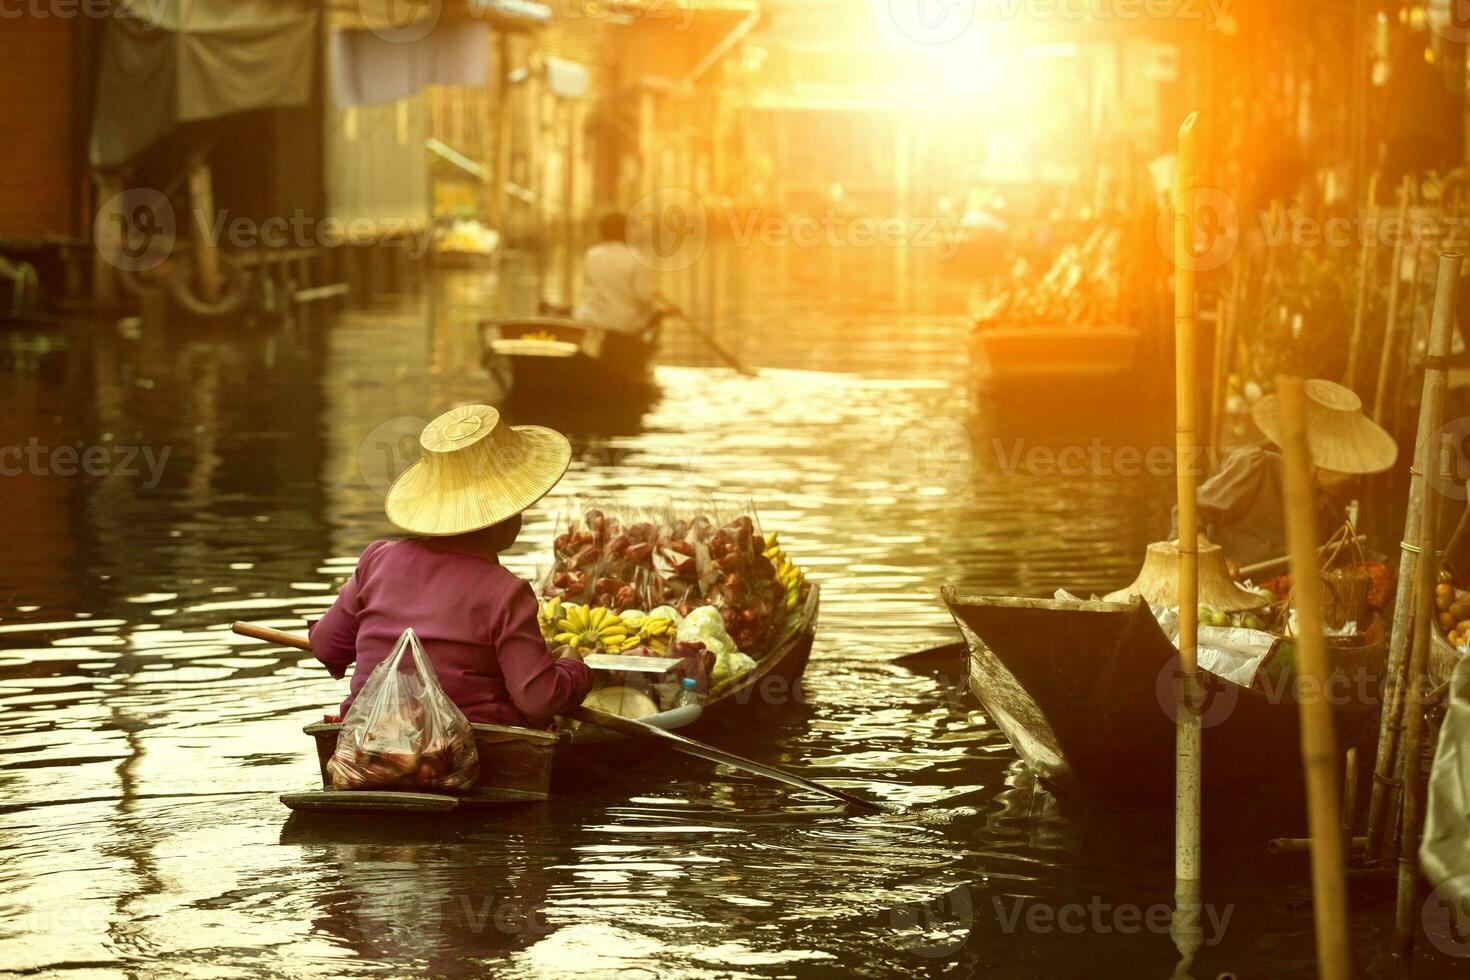 thai fruit seller sailing wooden boat in thailand tradition floating market photo